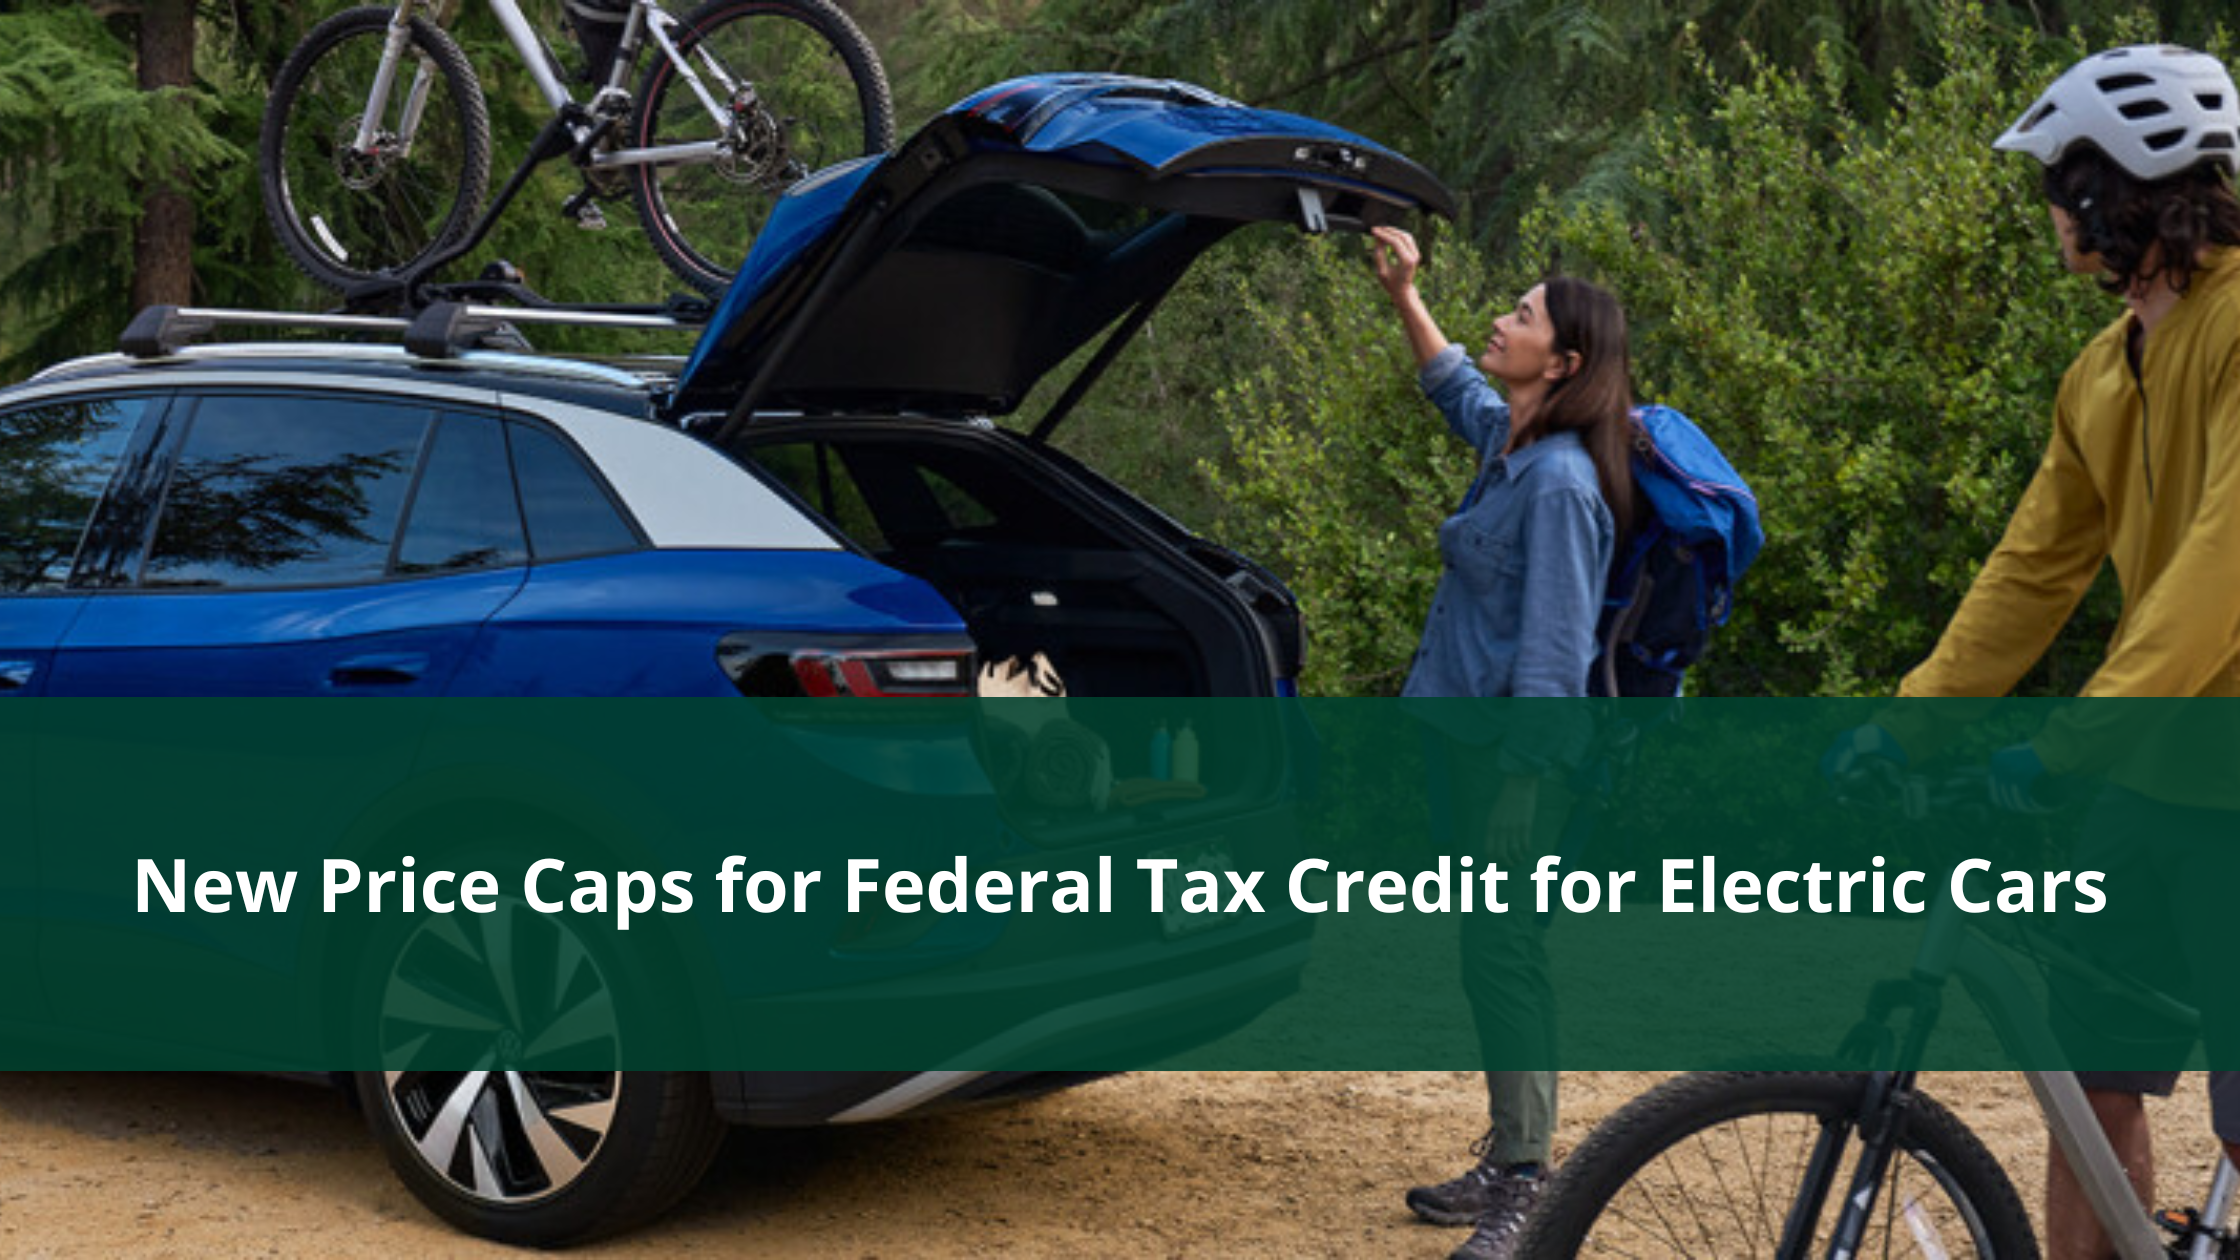 New Price Caps for Federal Tax Credit for Electric Cars